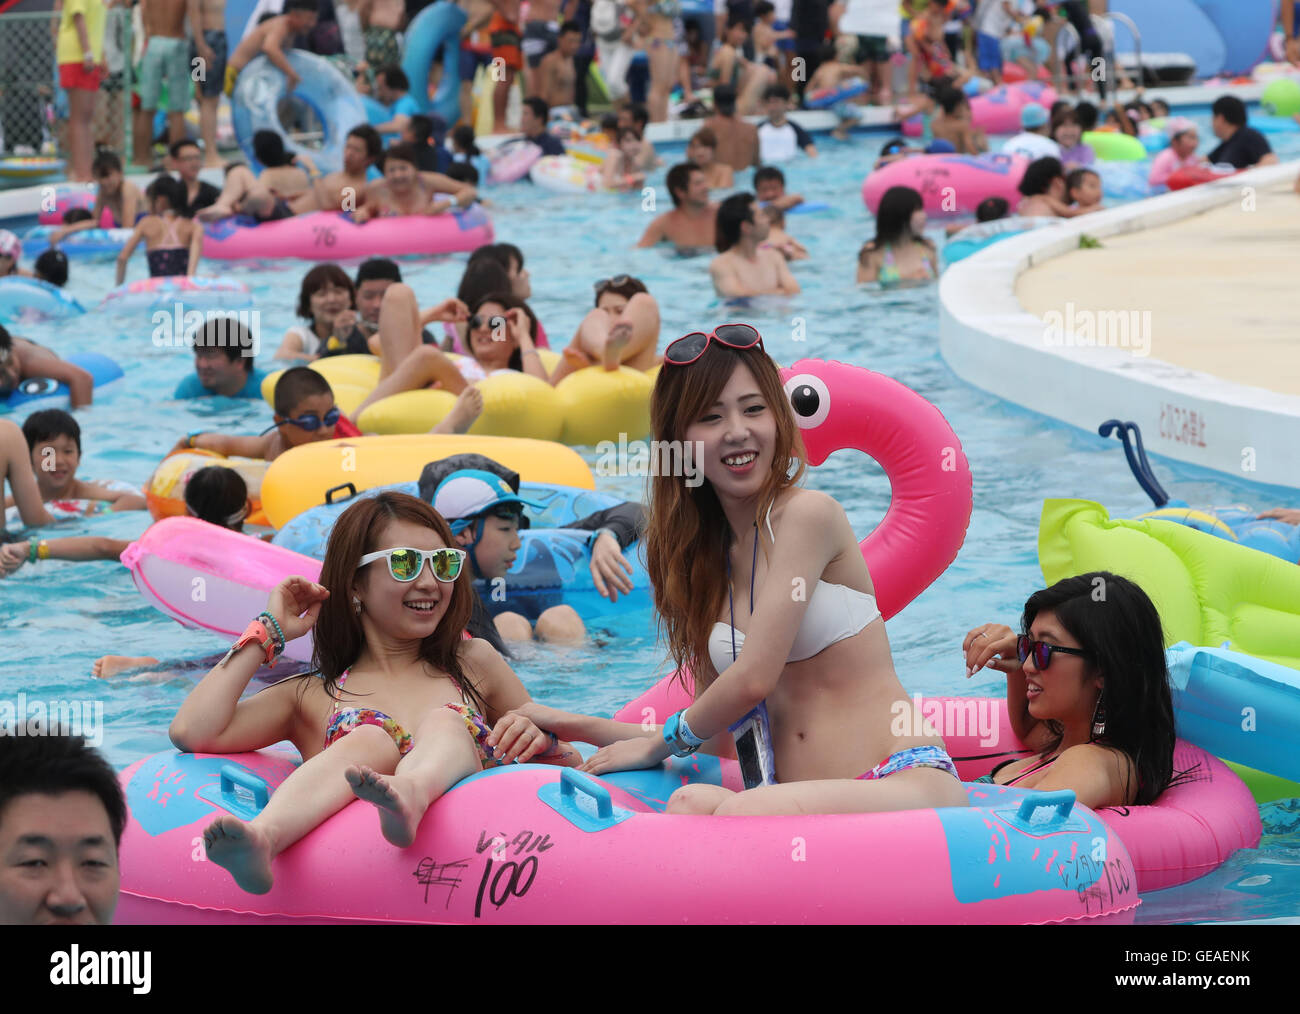 Tokyo, Japan. 24th July, 2016. People try to cool off in a crowded swimming pool at the Toshimaen amusement park in Tokyo on Sunday, July 24, 2016. Some 14,000 people visited the park, with has a number of pools and water slides, to beat the summer heat. © Yoshio Tsunoda/AFLO/Alamy Live News Stock Photo